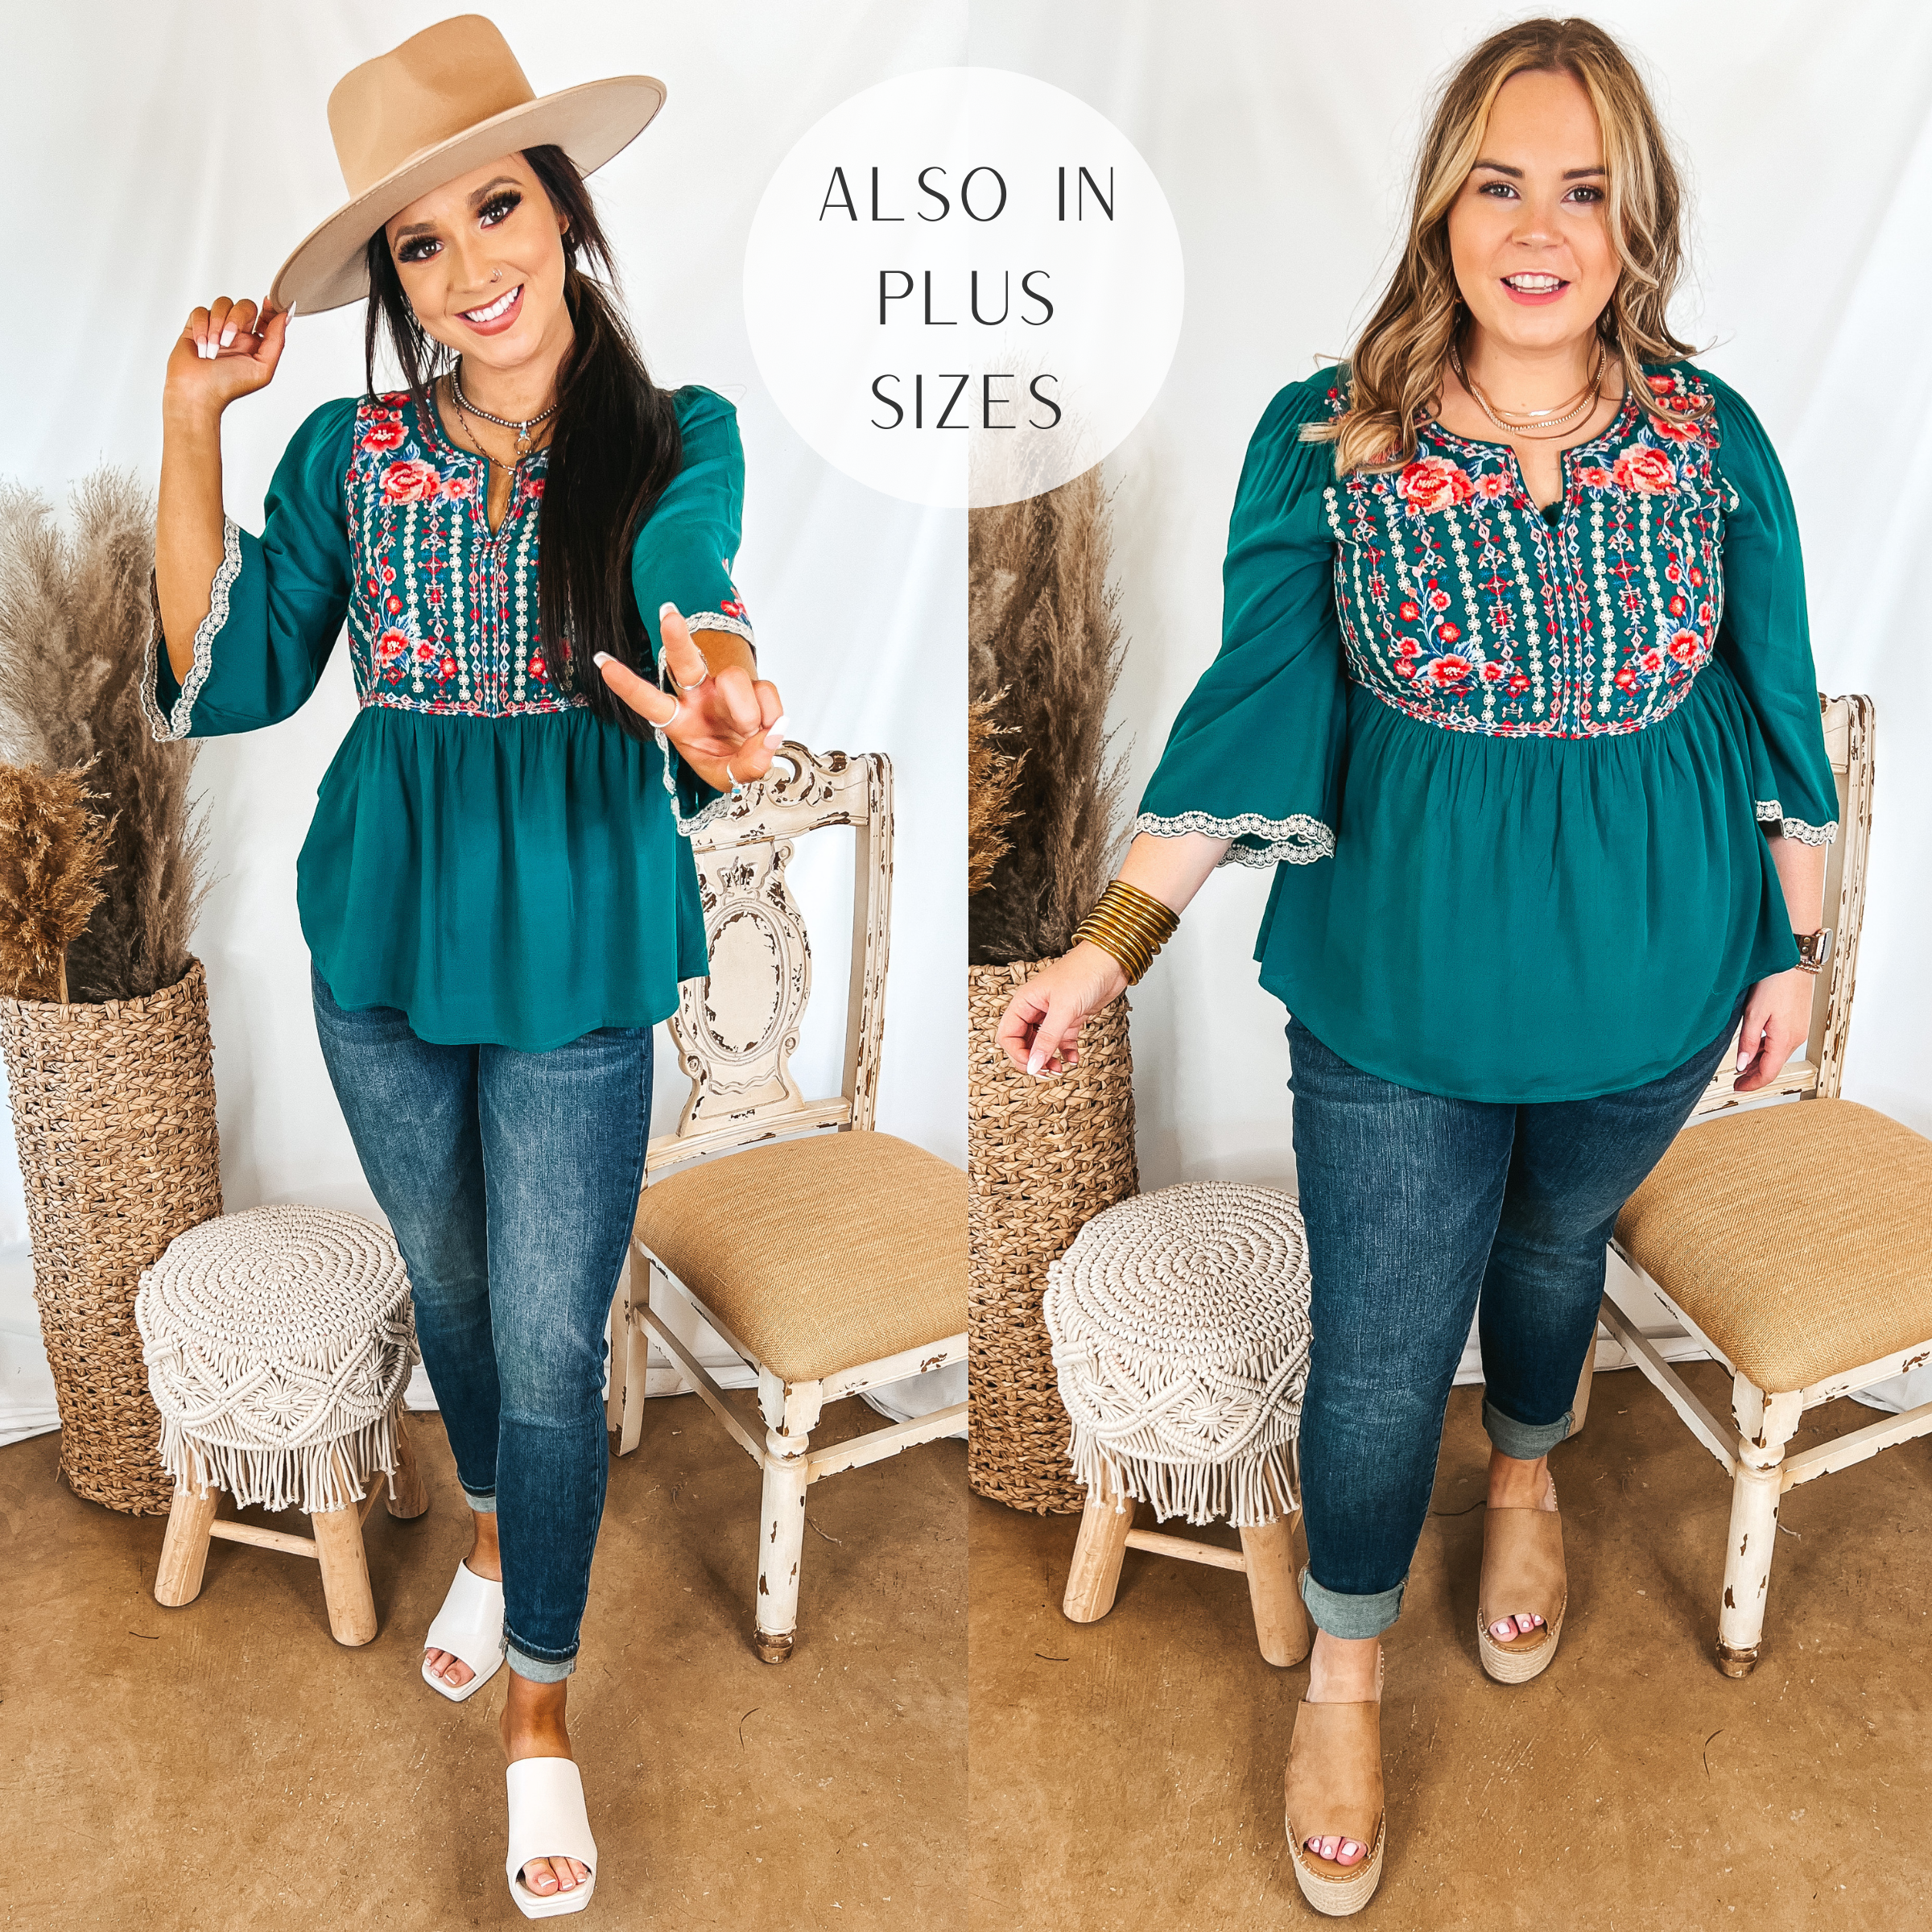 Models are wearing a teal babydoll top with embroidery on the top. Both models have it paired with dark wash skinny jeans that have no distressing. Size small model has it paired with white heels and a tan hat. Size large model has it paired with tan wedges and gold jewelry.